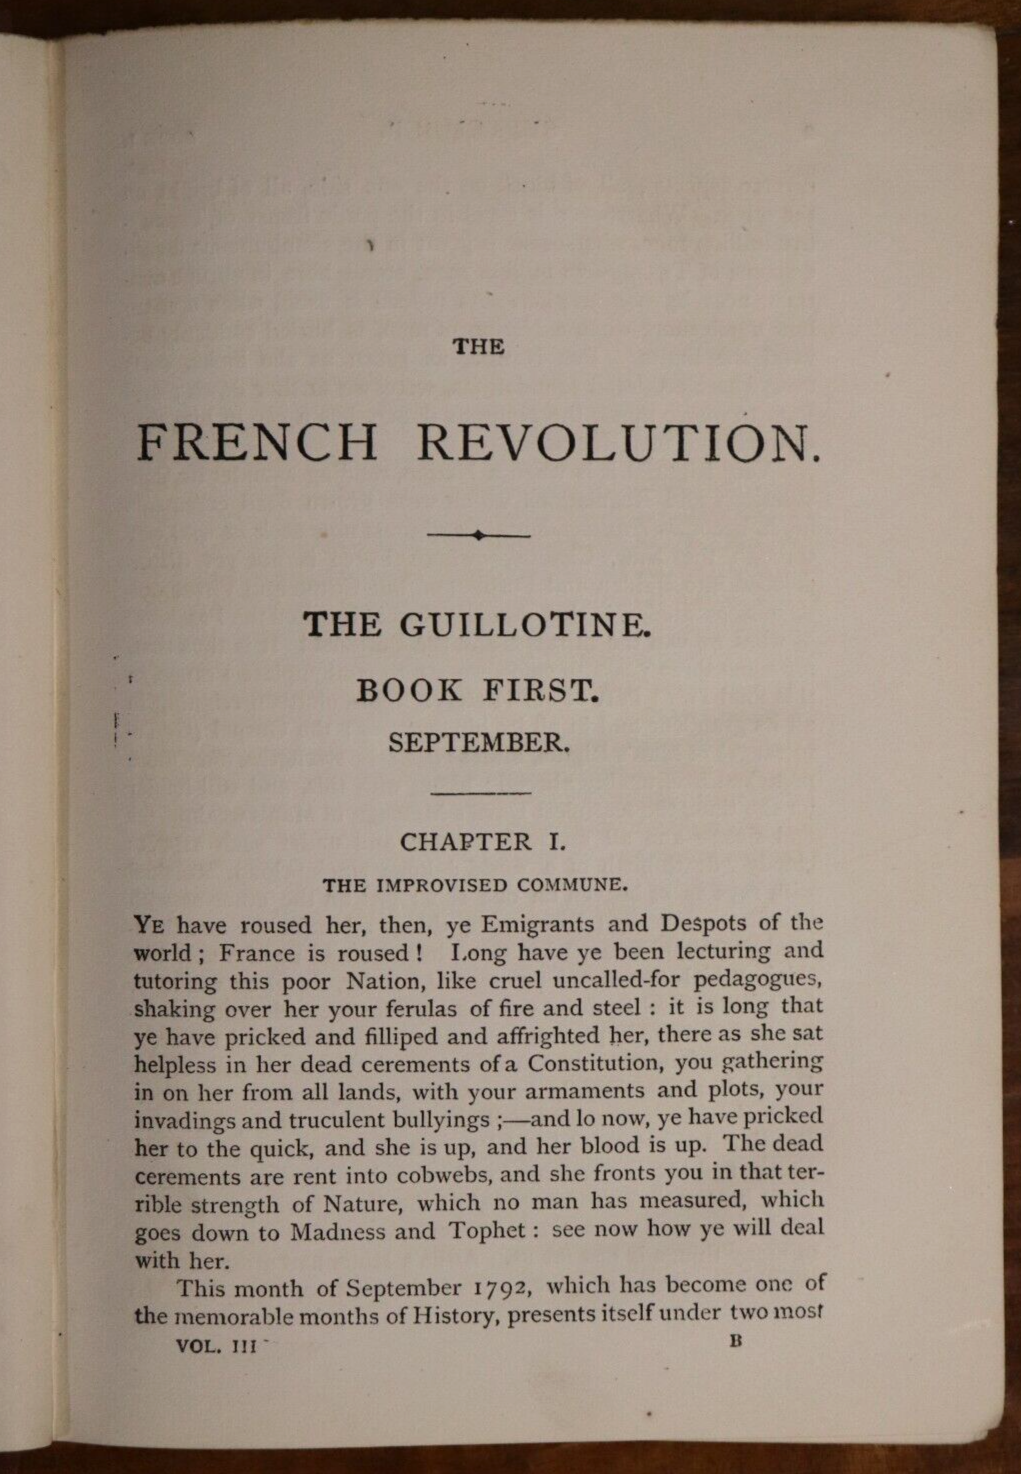 c1870 3vol The French Revolution: A History by Thomas Carlyle Antiquarian Books